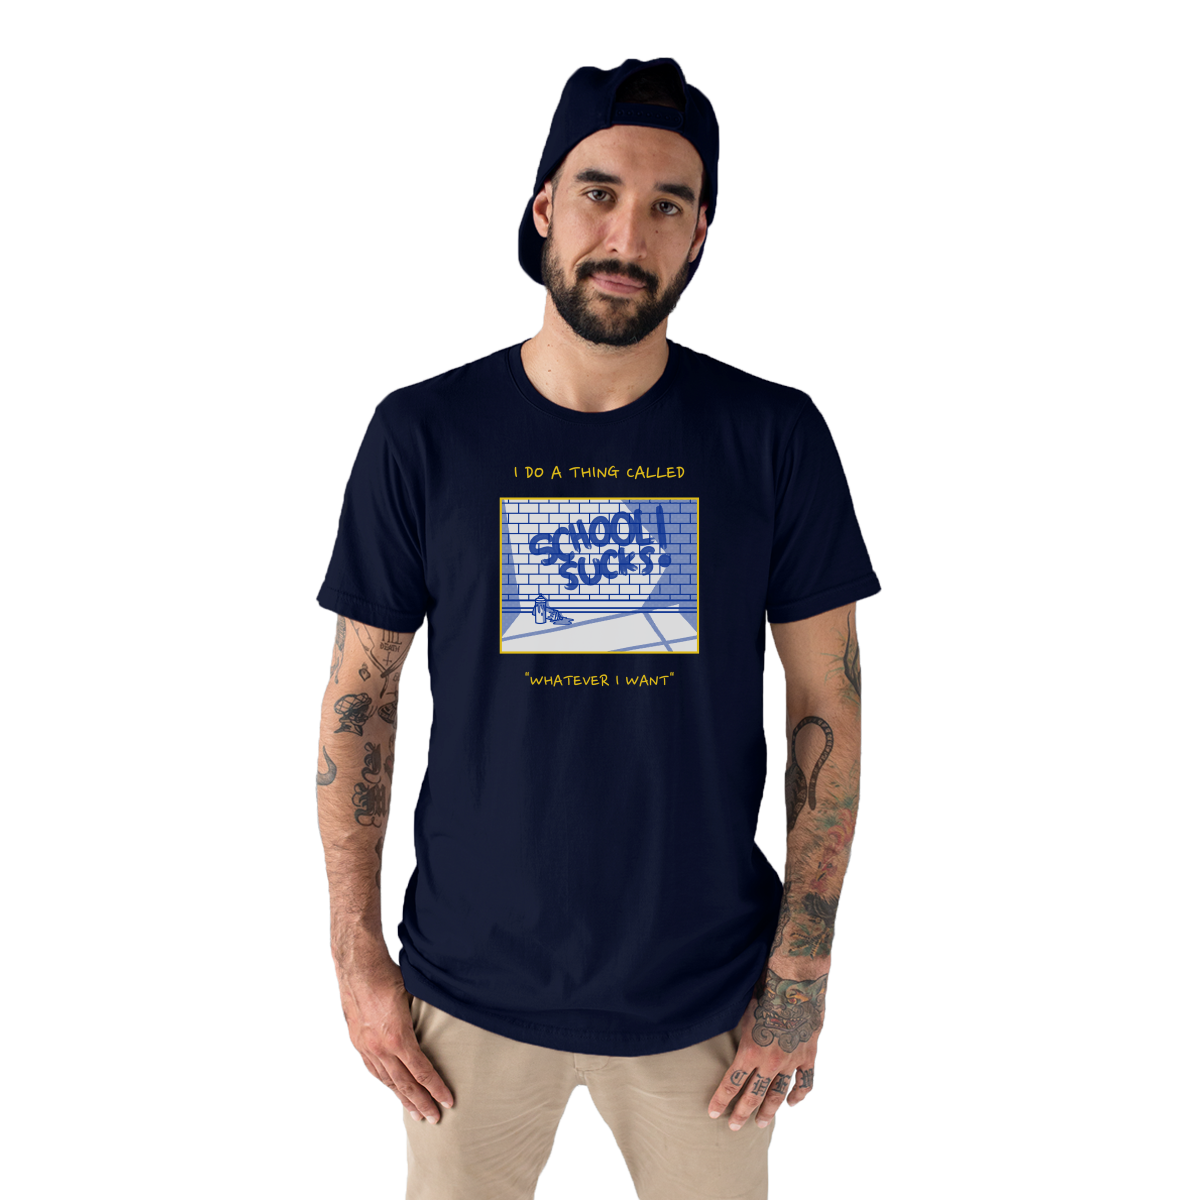 I Do A Thing Called "Whatever I Want" Men's T-shirt | Navy